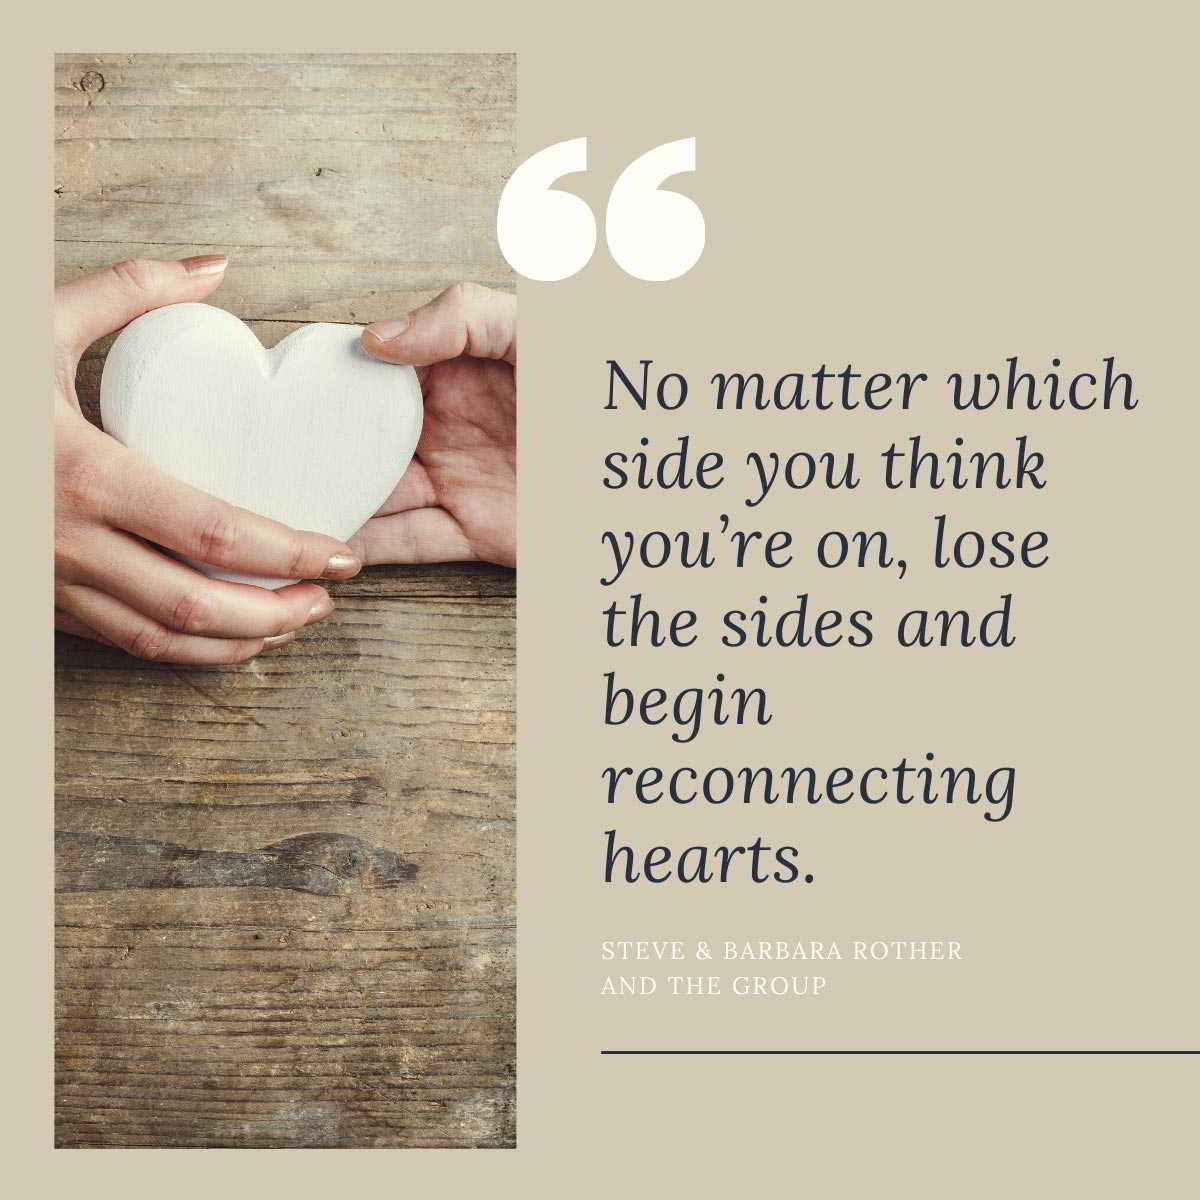 Reconnecting hearts